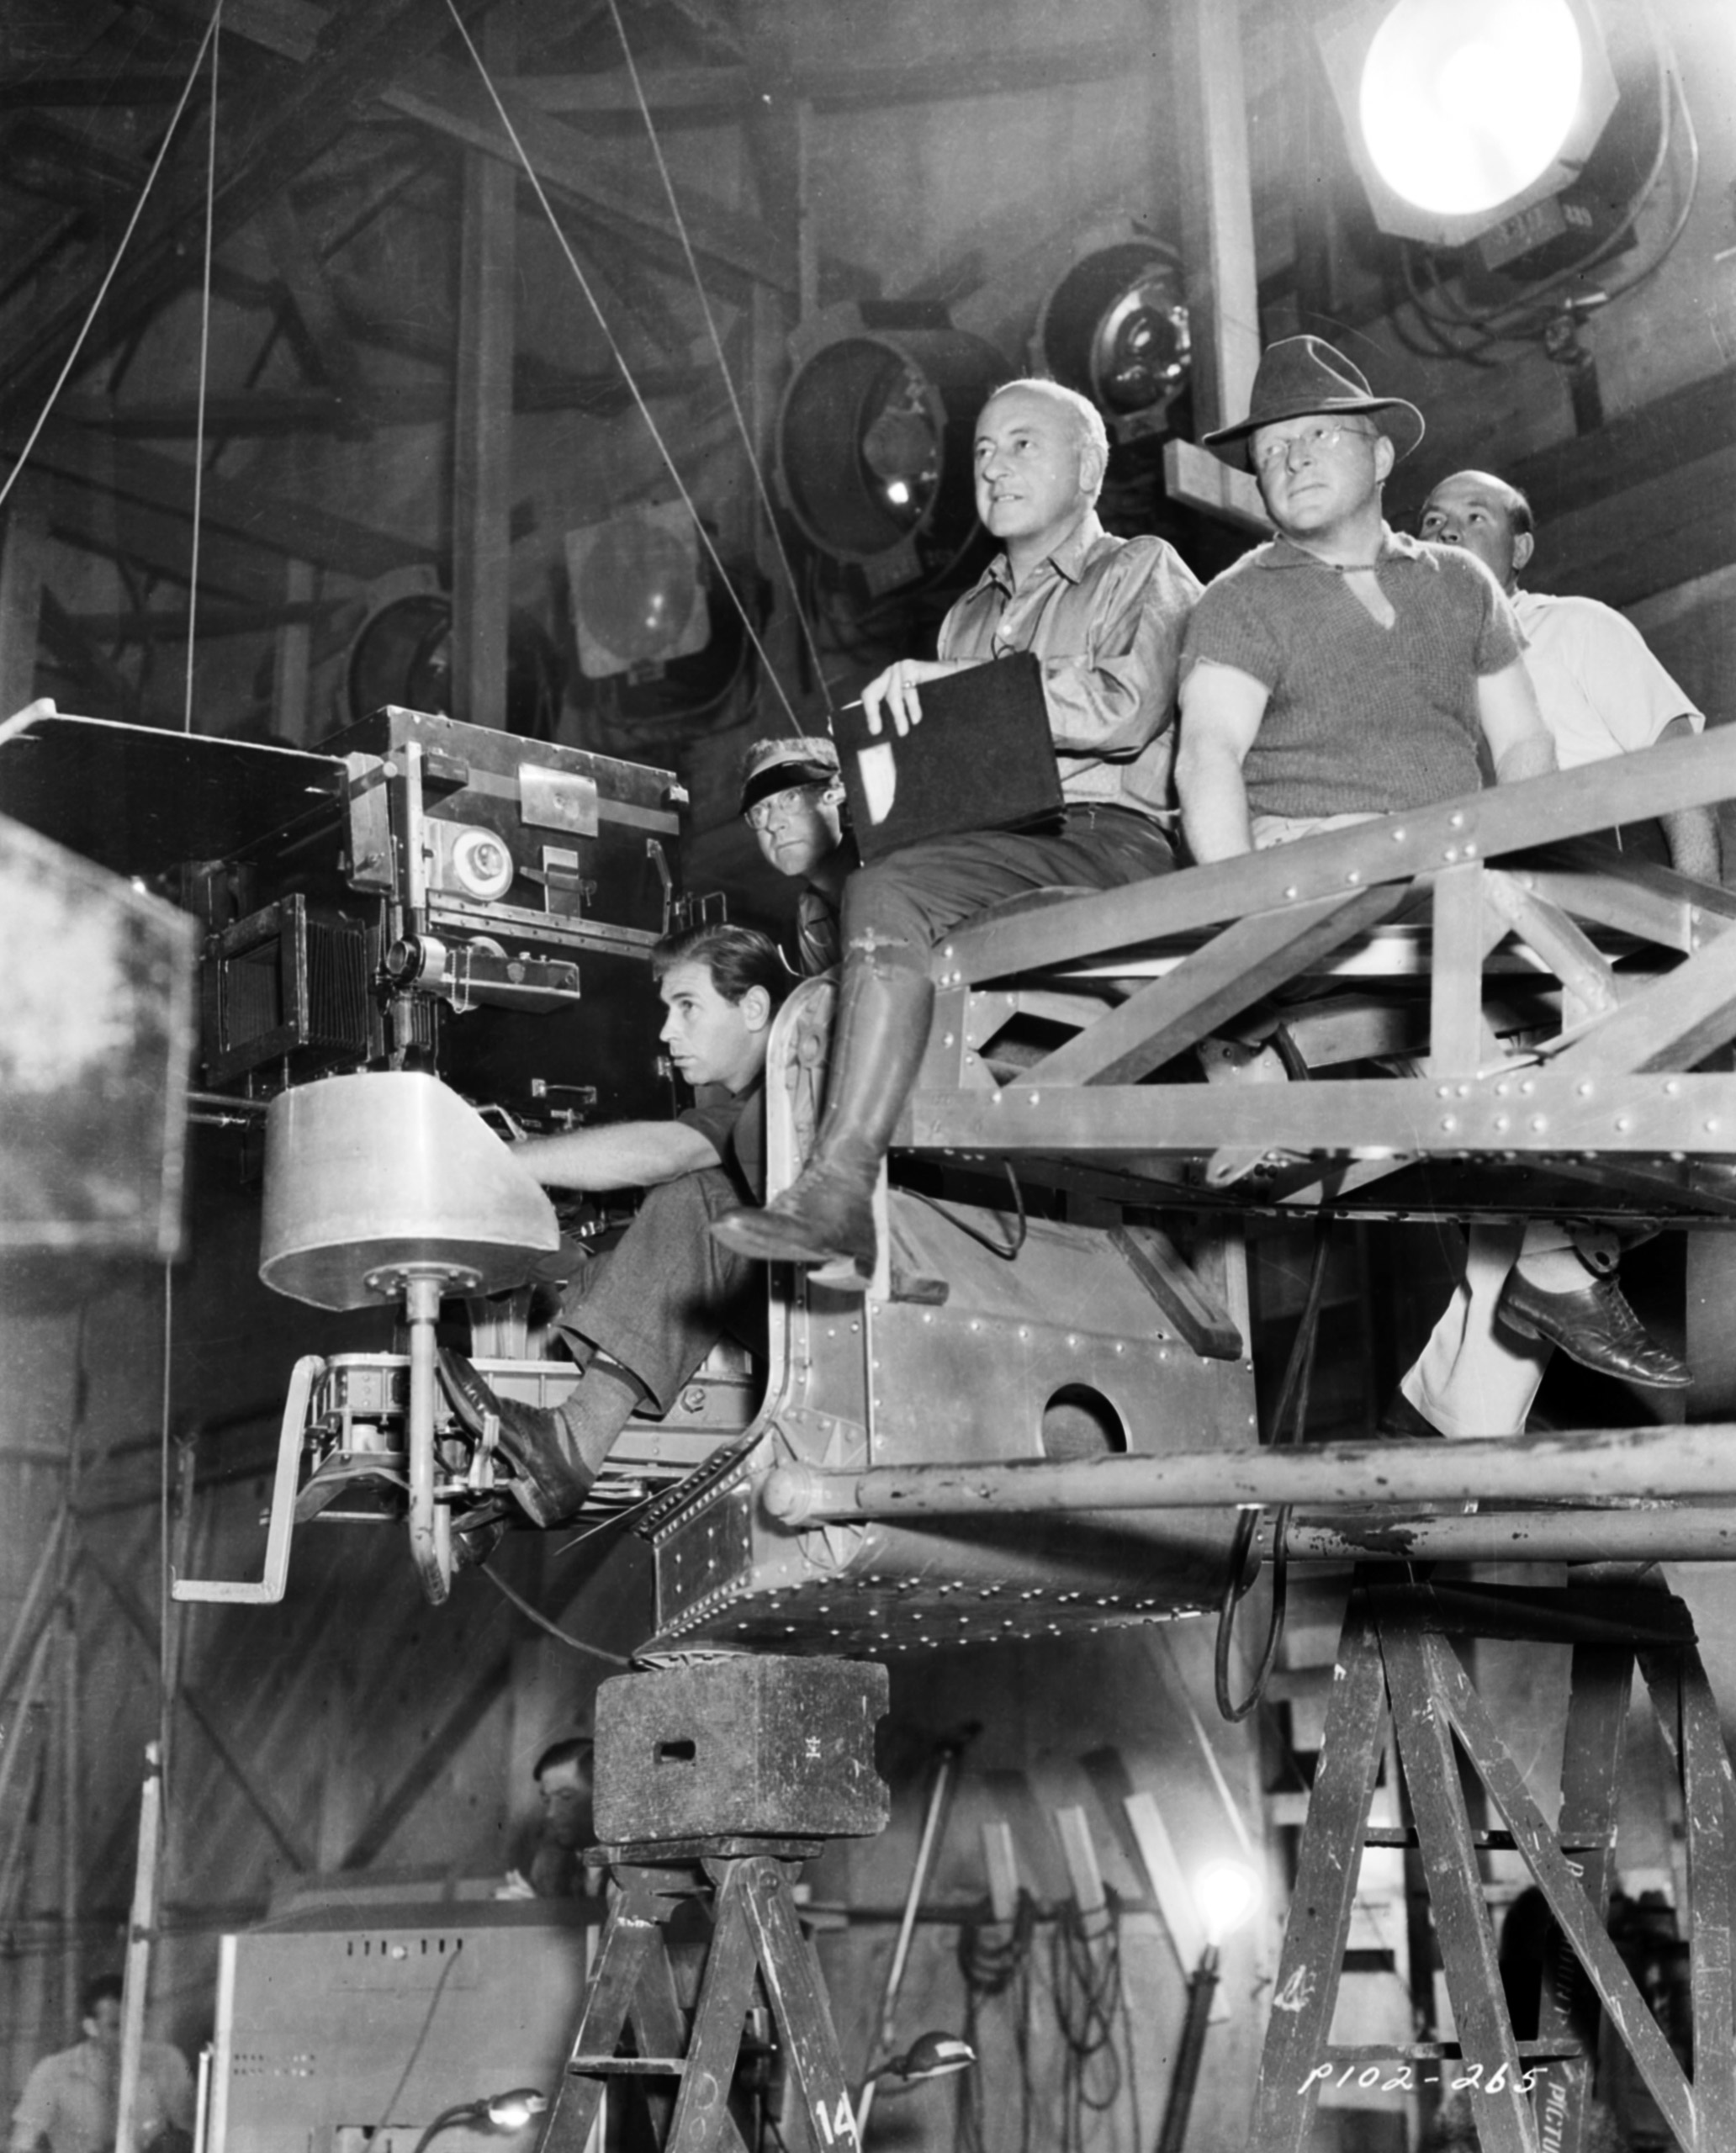 Cecil B DeMille sitting on a camera rig with members of his crew, on the set of the film 'Samson and Delilah', for Paramount Pictures, 1949.